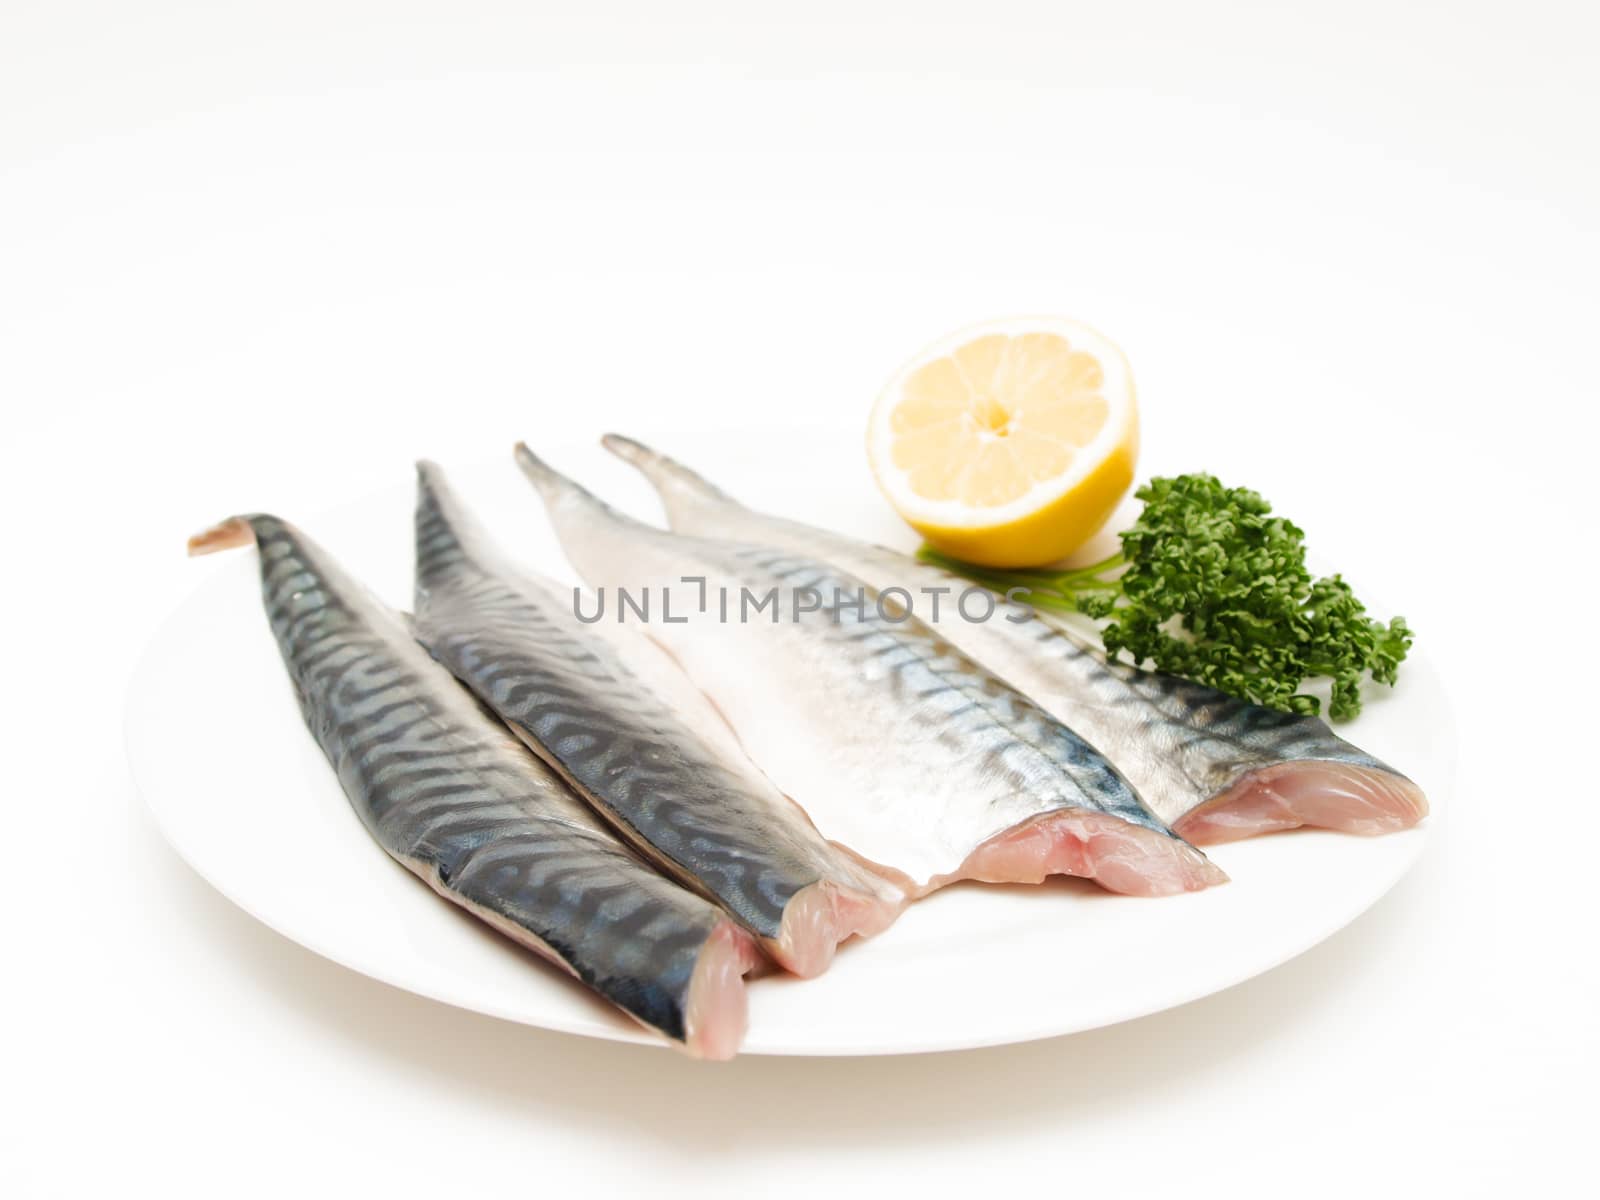 Raw mackerel fish filet with half a lemon and parsley on white plate